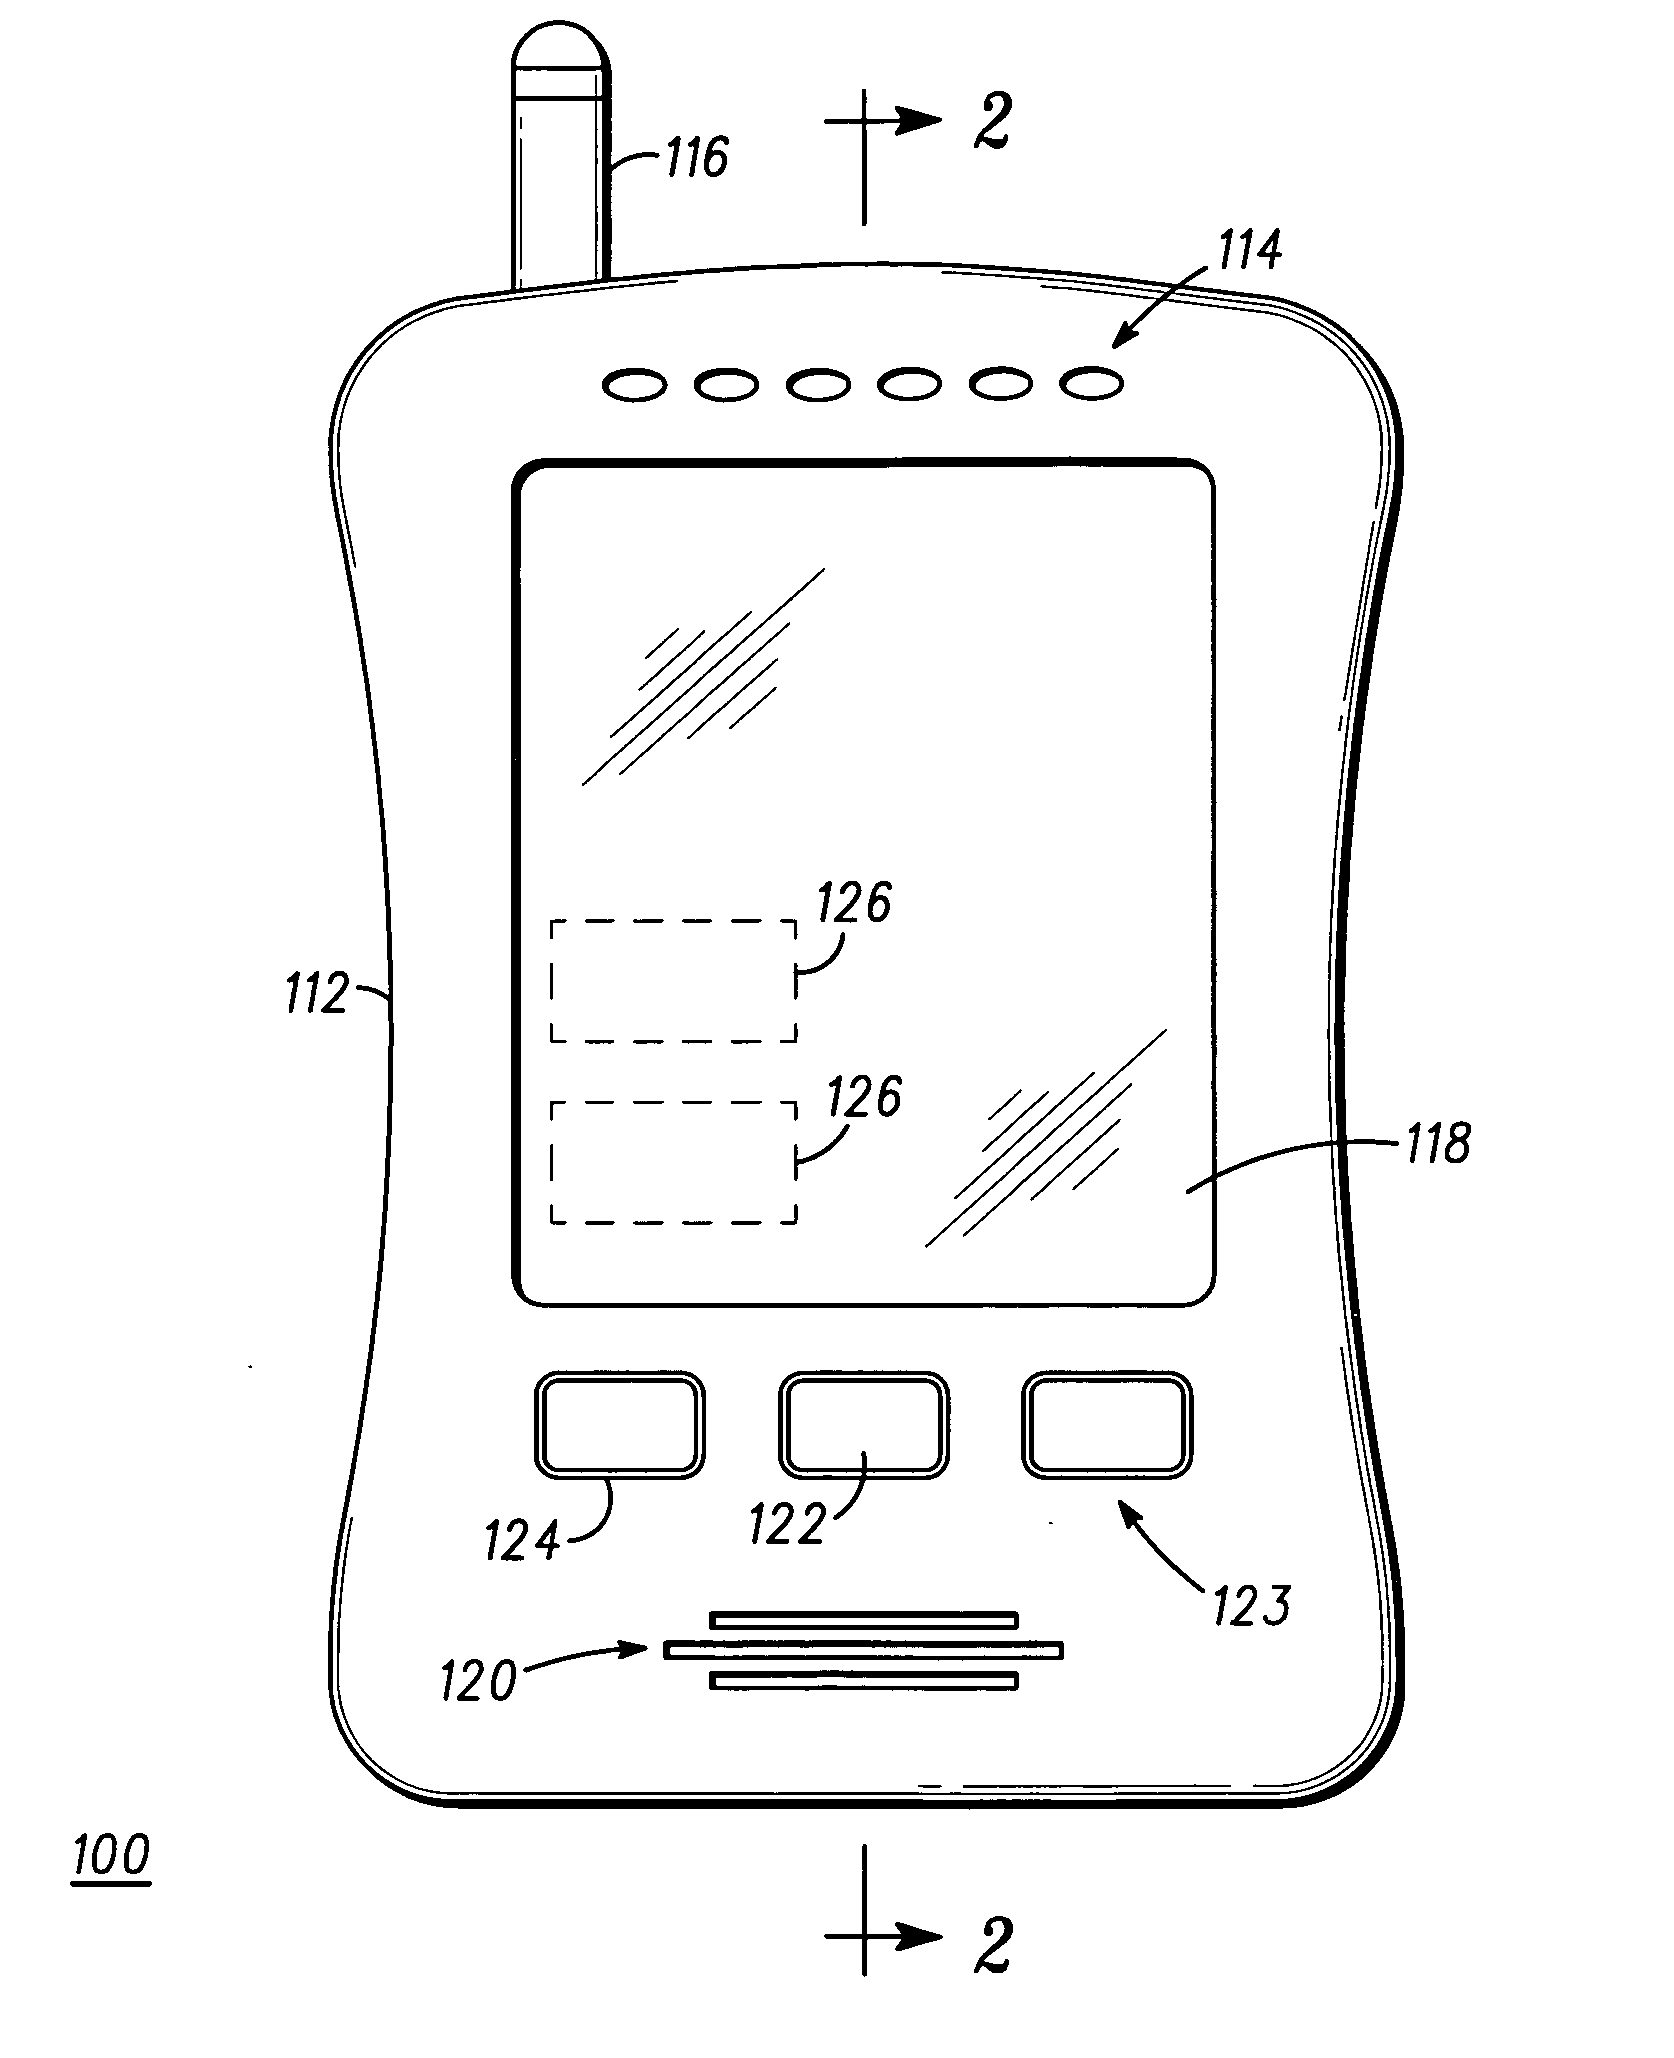 Handheld device having localized force feedback